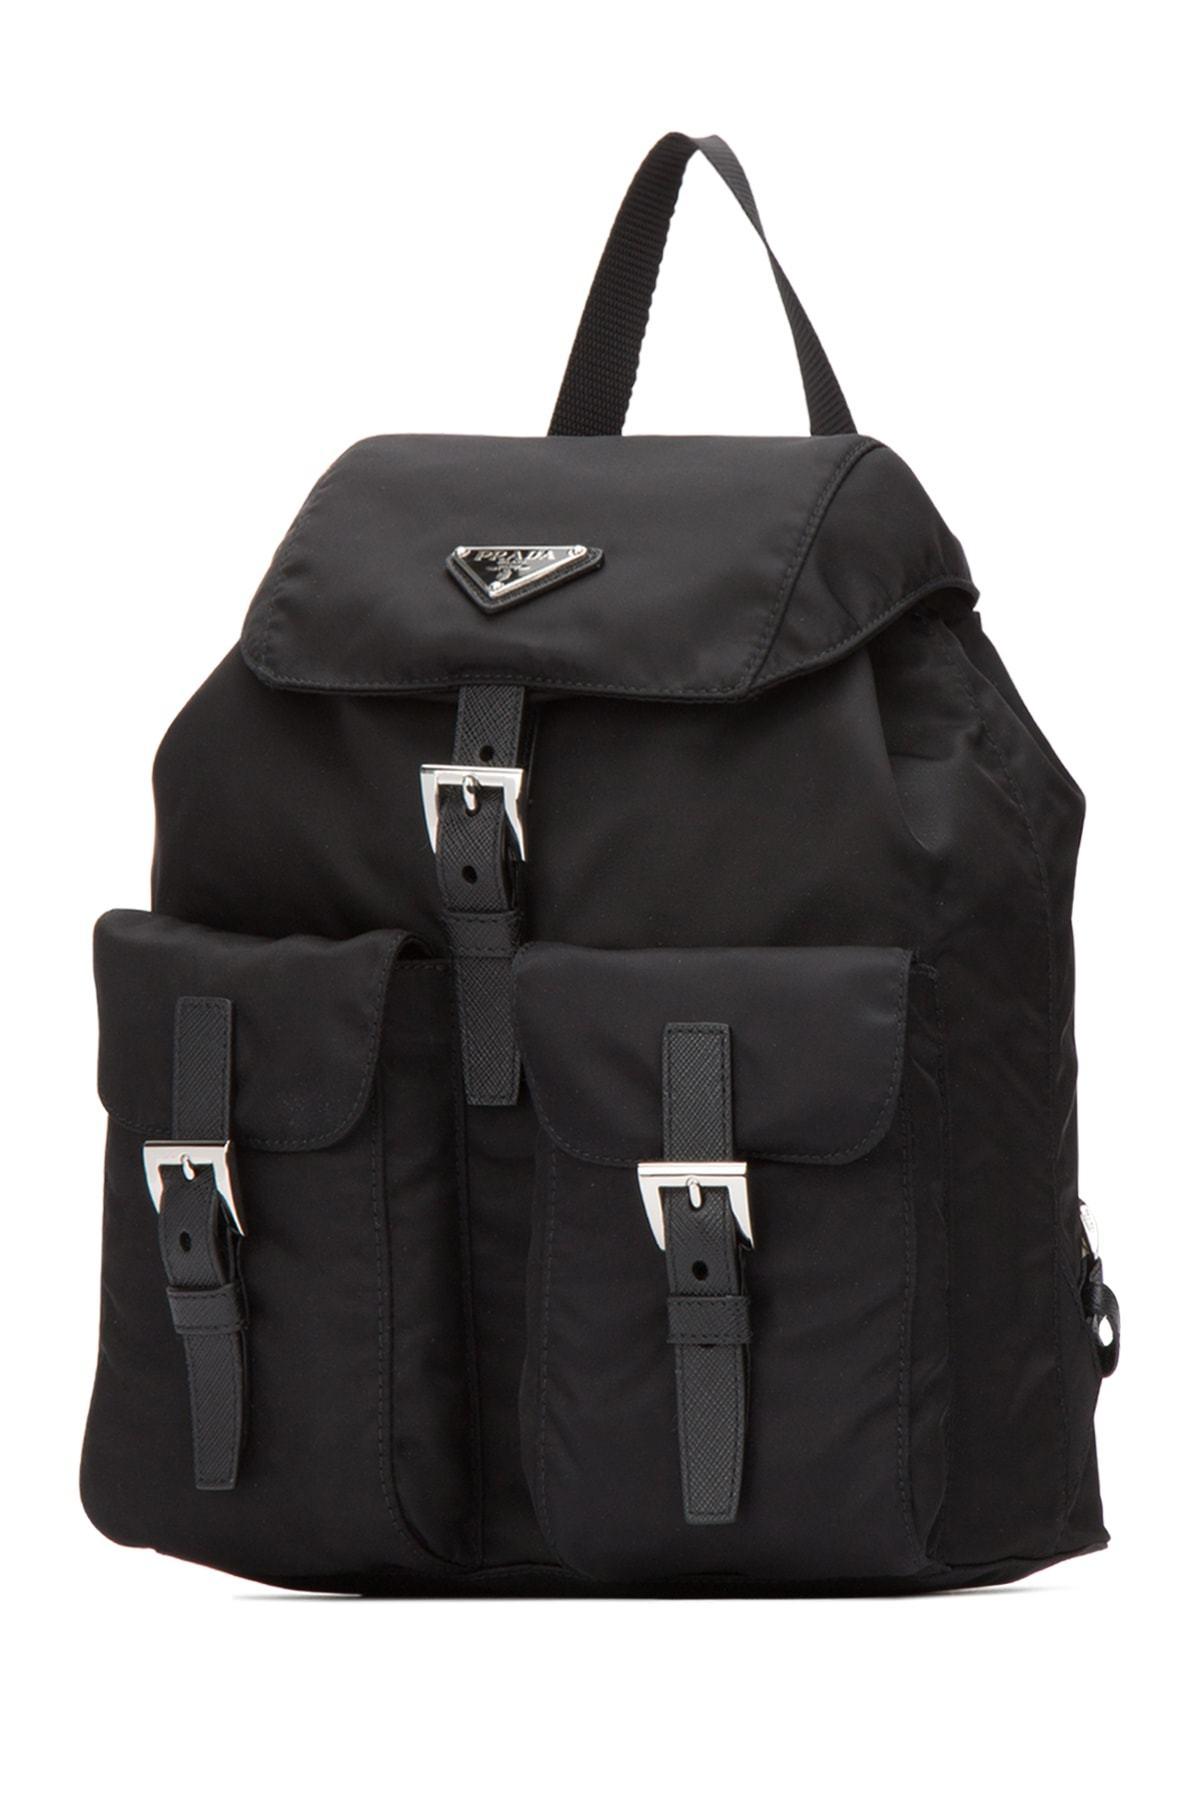 Prada Leather Plaque Backpack in Black - Lyst